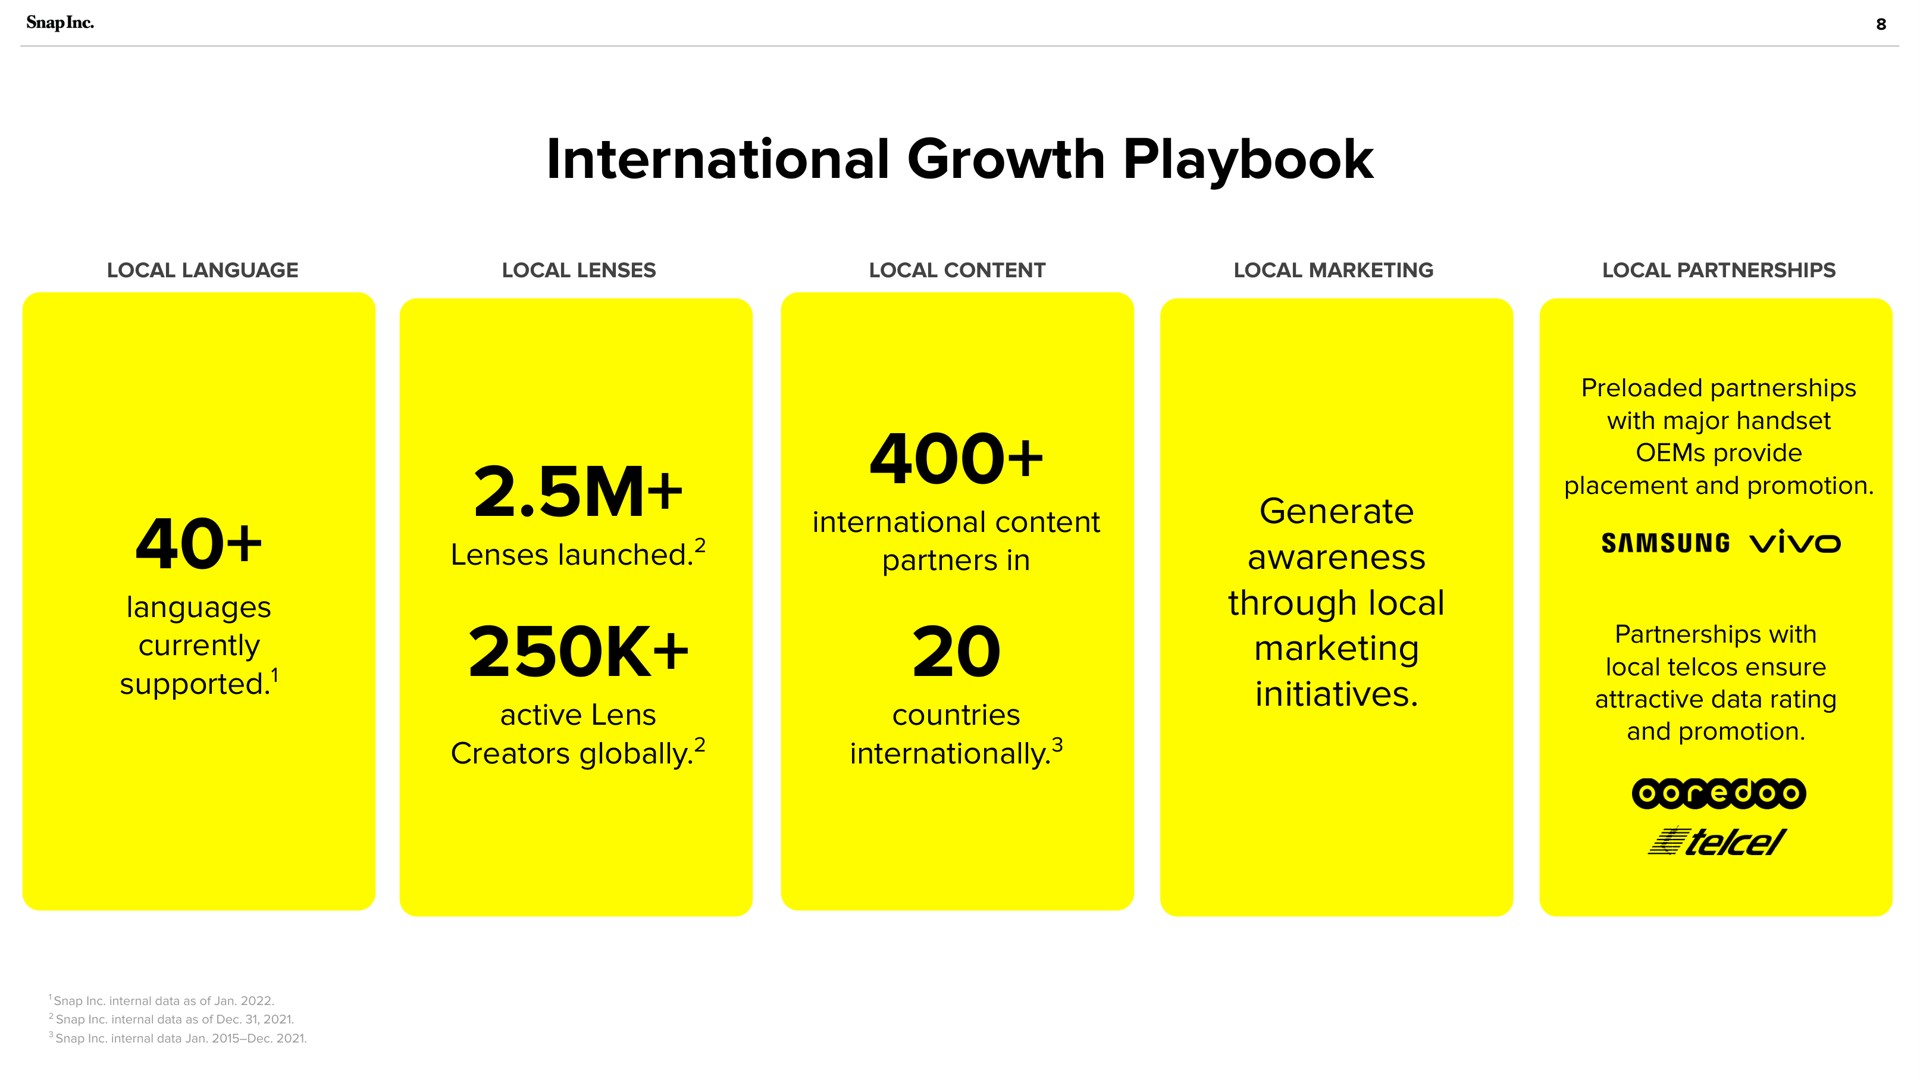 international growth playbook supported lenses launched creators globally internationally generate awareness through local marketing initiatives | Snap Inc